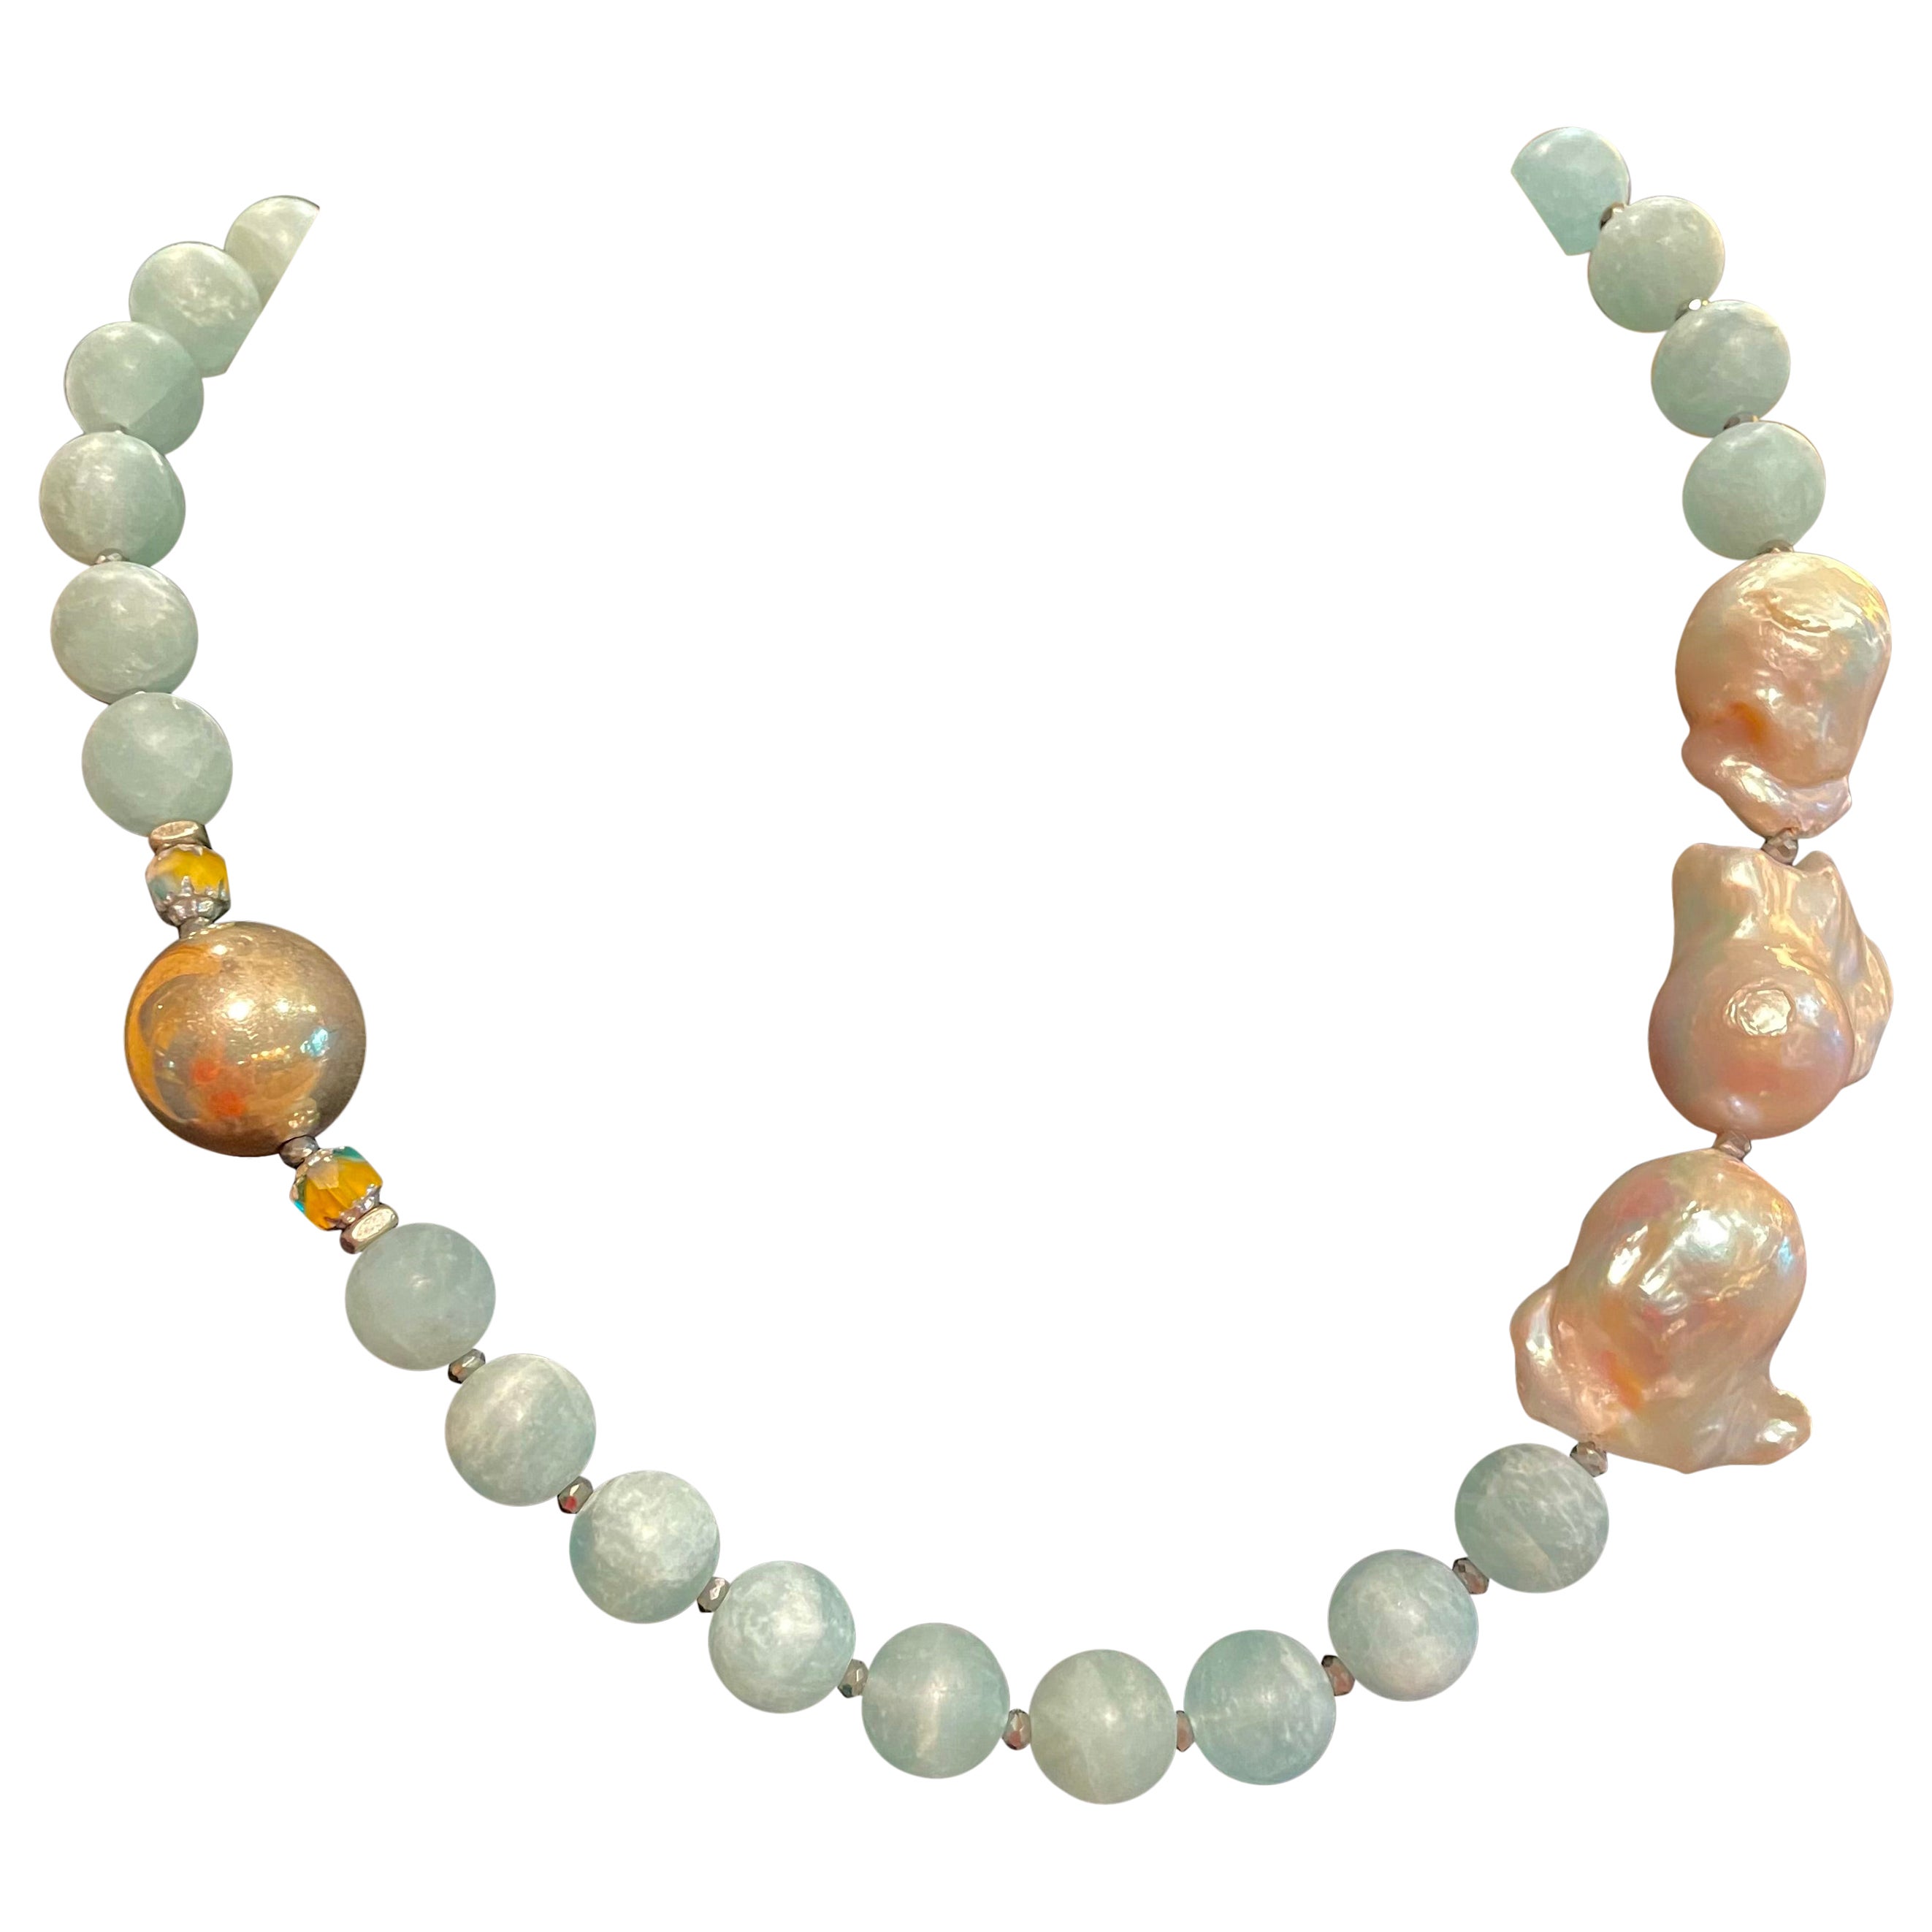 LB offers Large Aquamarine beads and Baroque Pearls Sterling Silver necklace For Sale